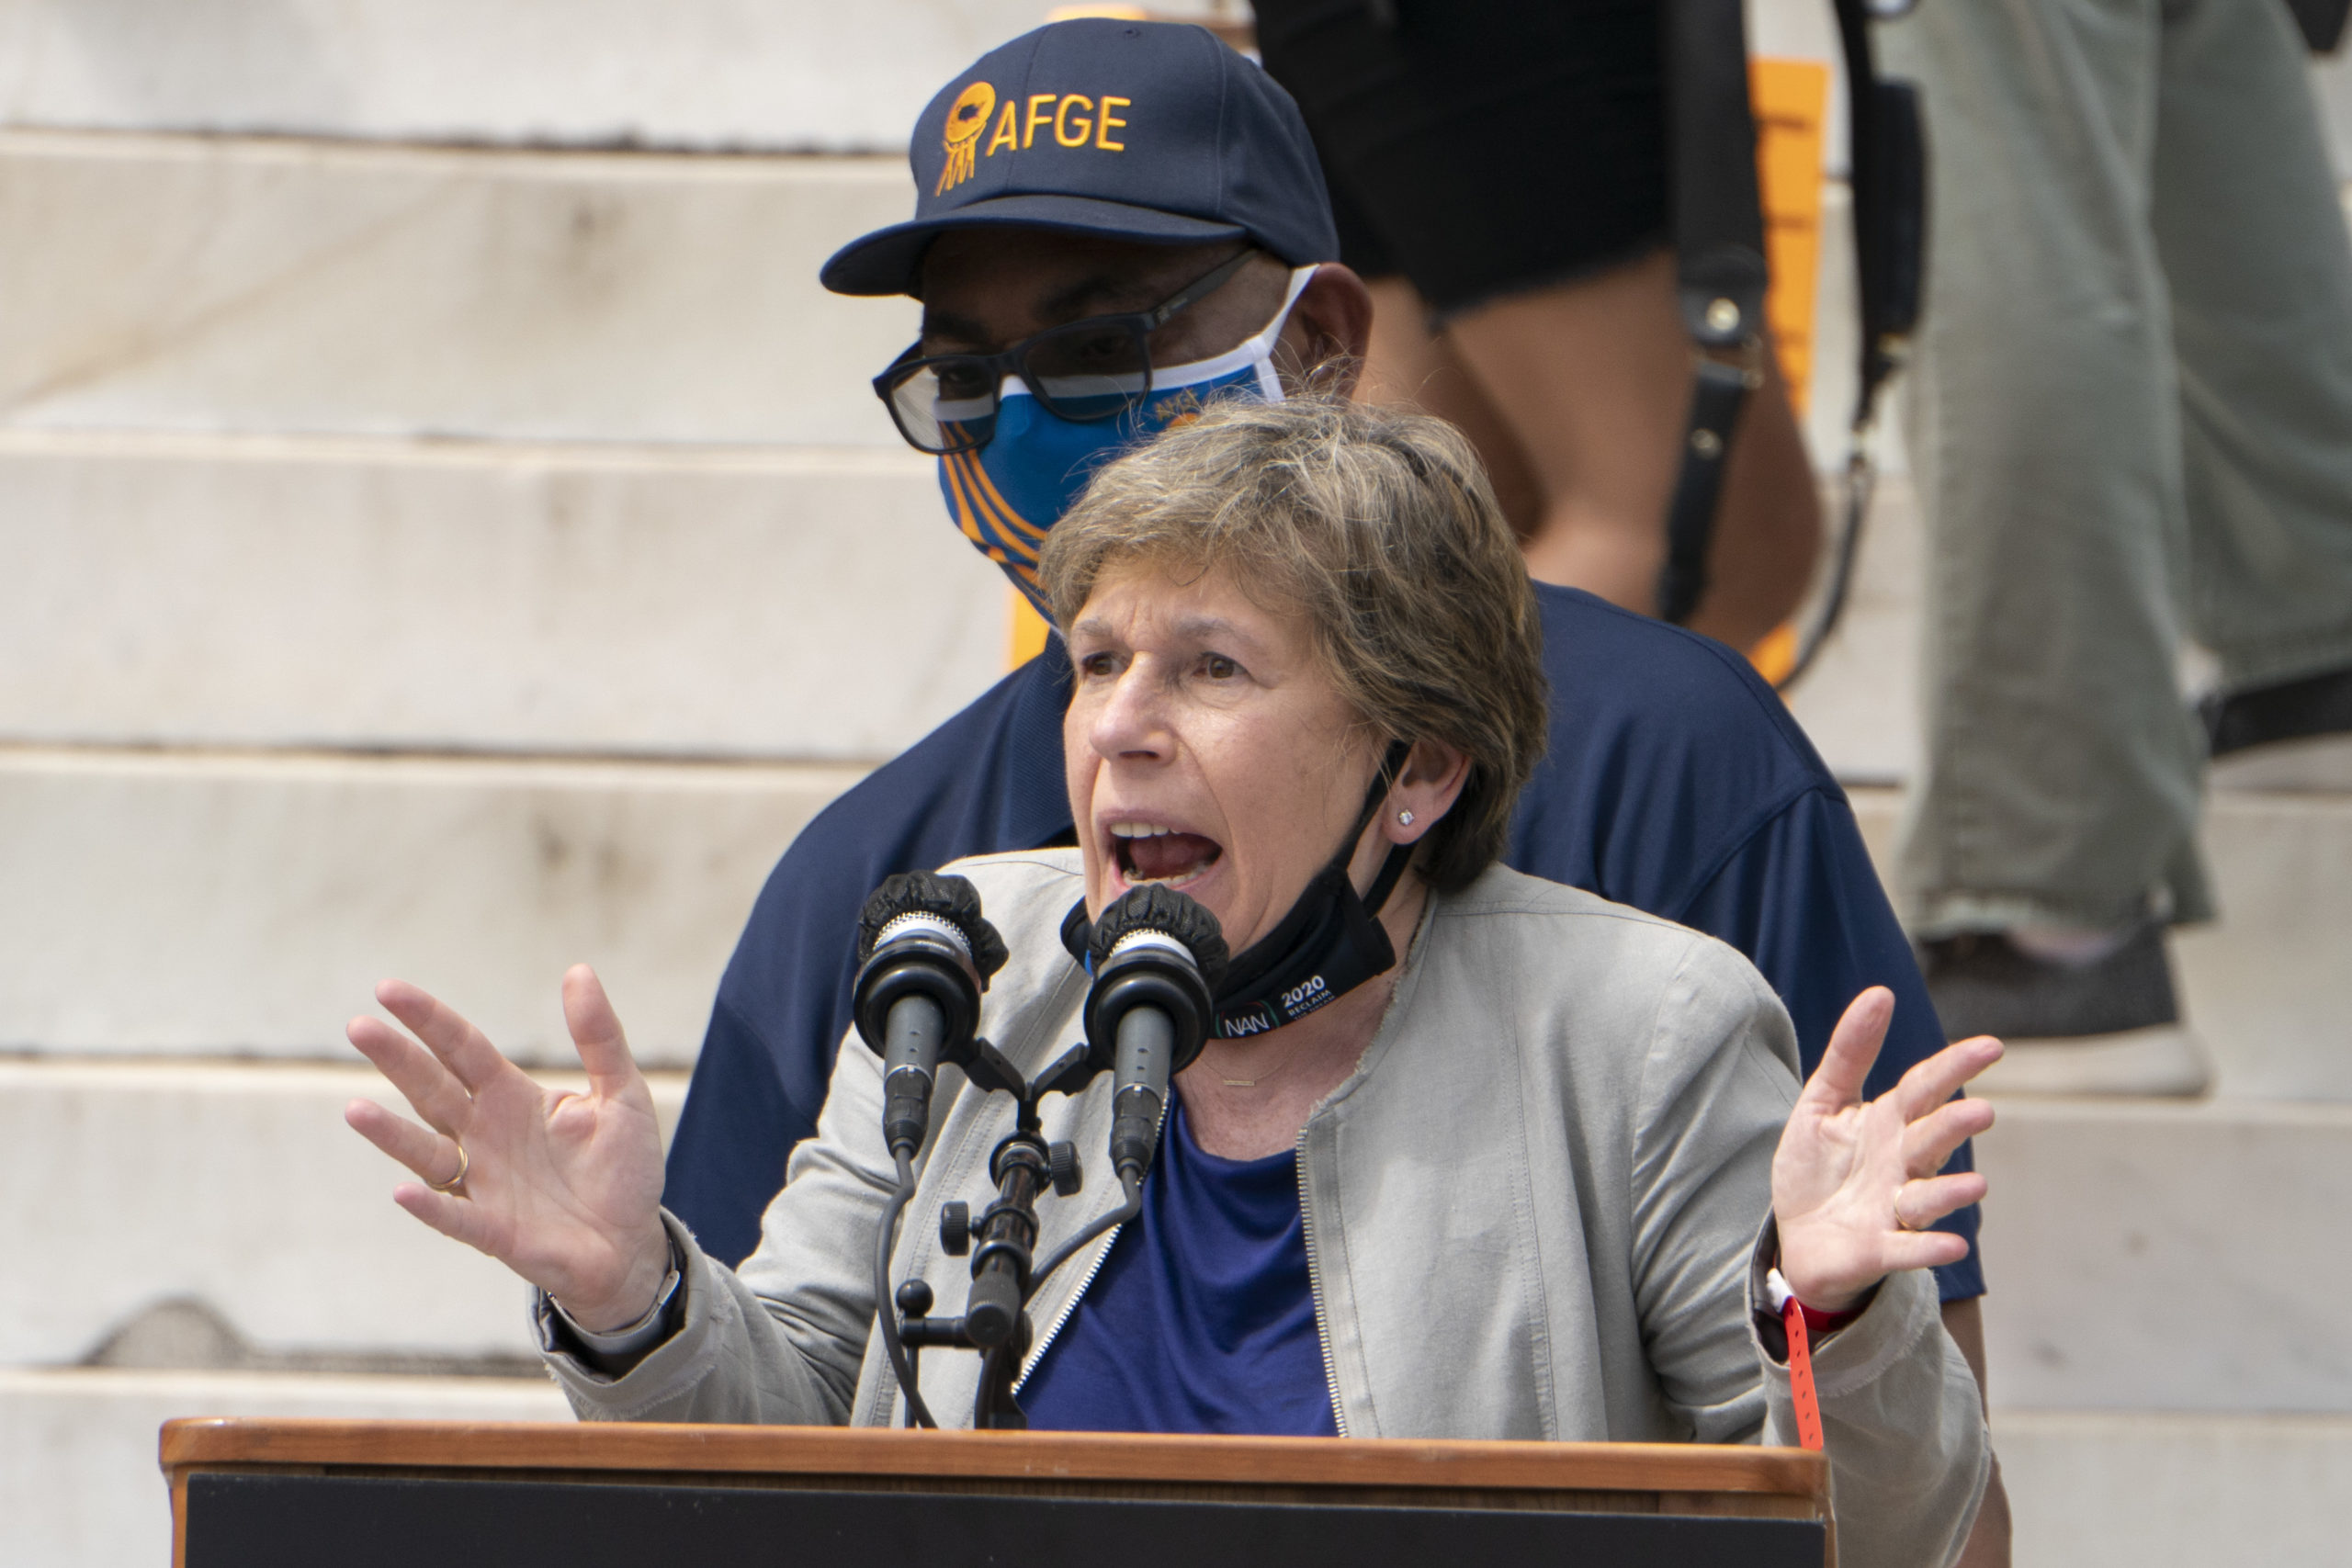 Randi Weingarten, president of American Federation of Teachers, speaks during an August rally in Washington D.C. (Jacquelyn Martin/Pool/AFP via Getty Images)